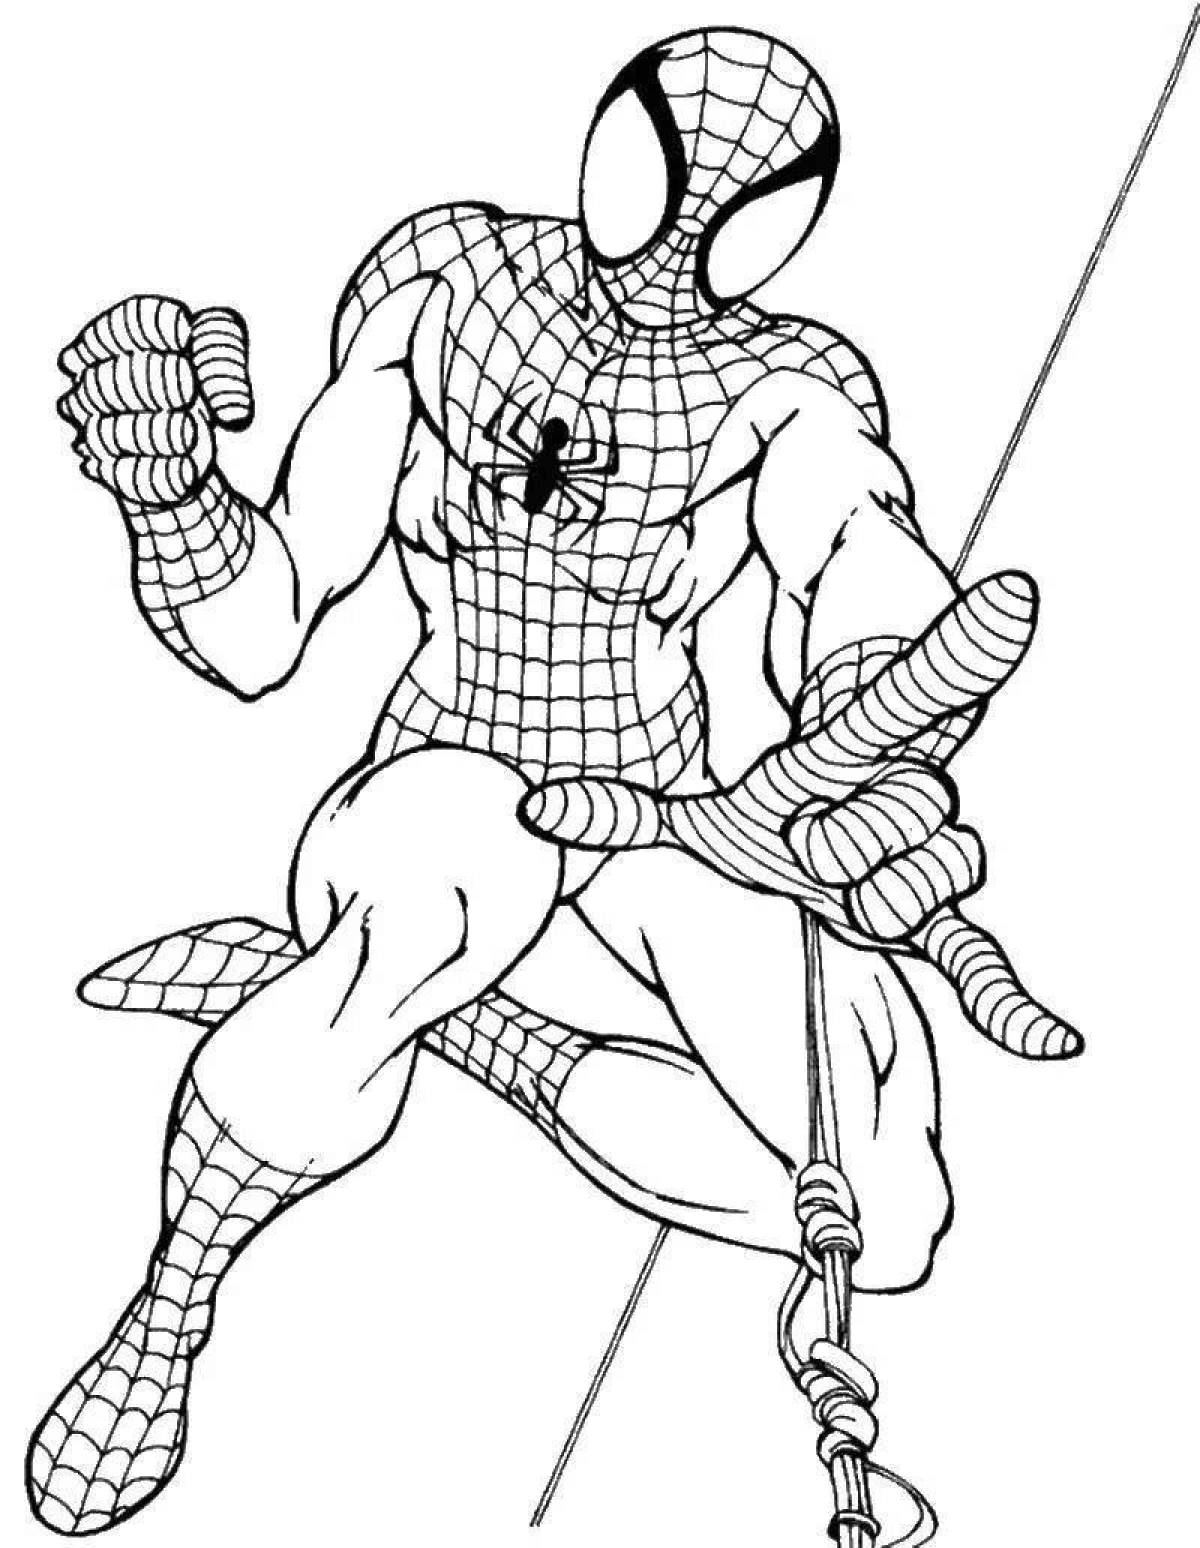 Fabulous spider-man coloring page